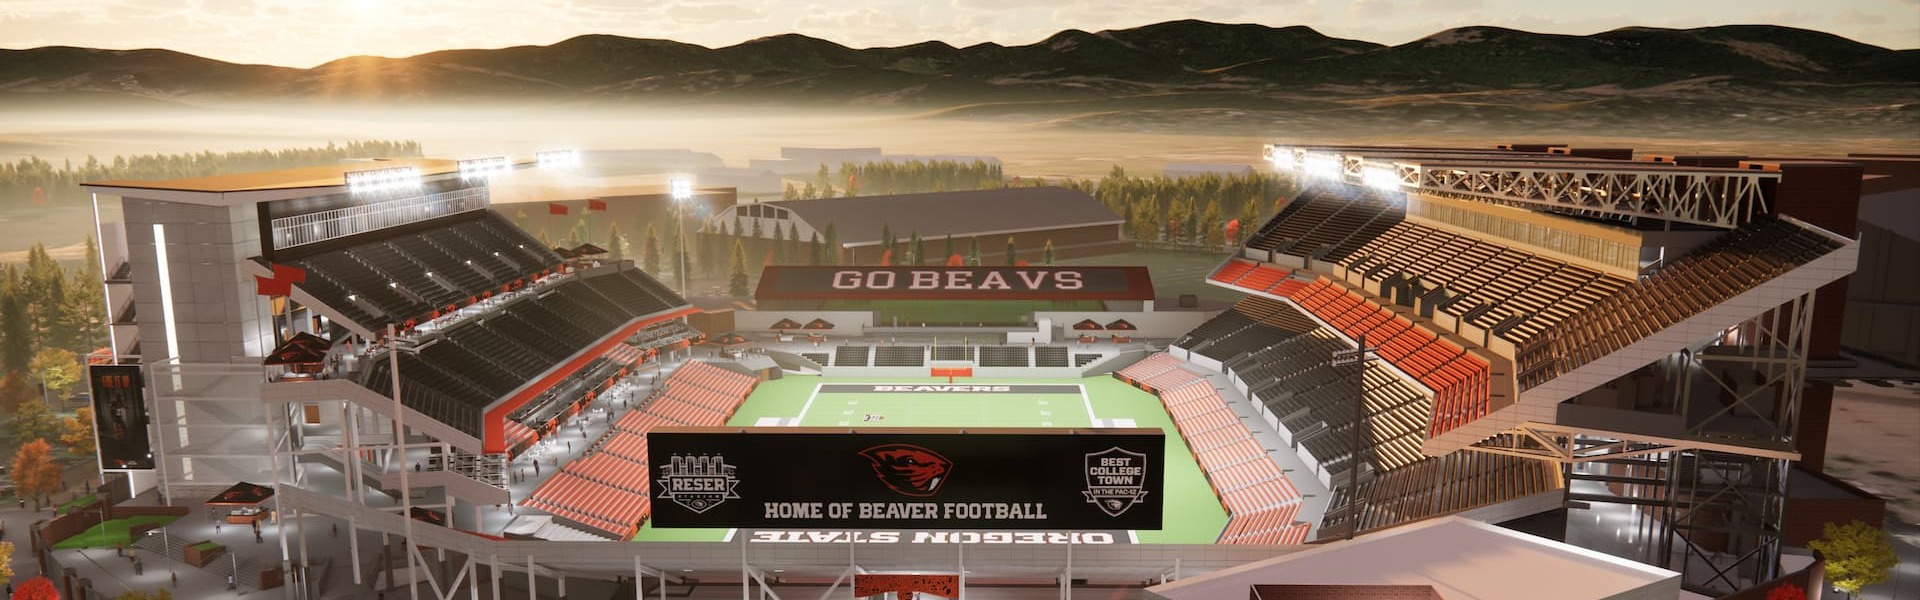 Rendering of what Oregon State's University's Reser Stadium will look like after a $160.5 million project to fully renovate the west side of the stadium.